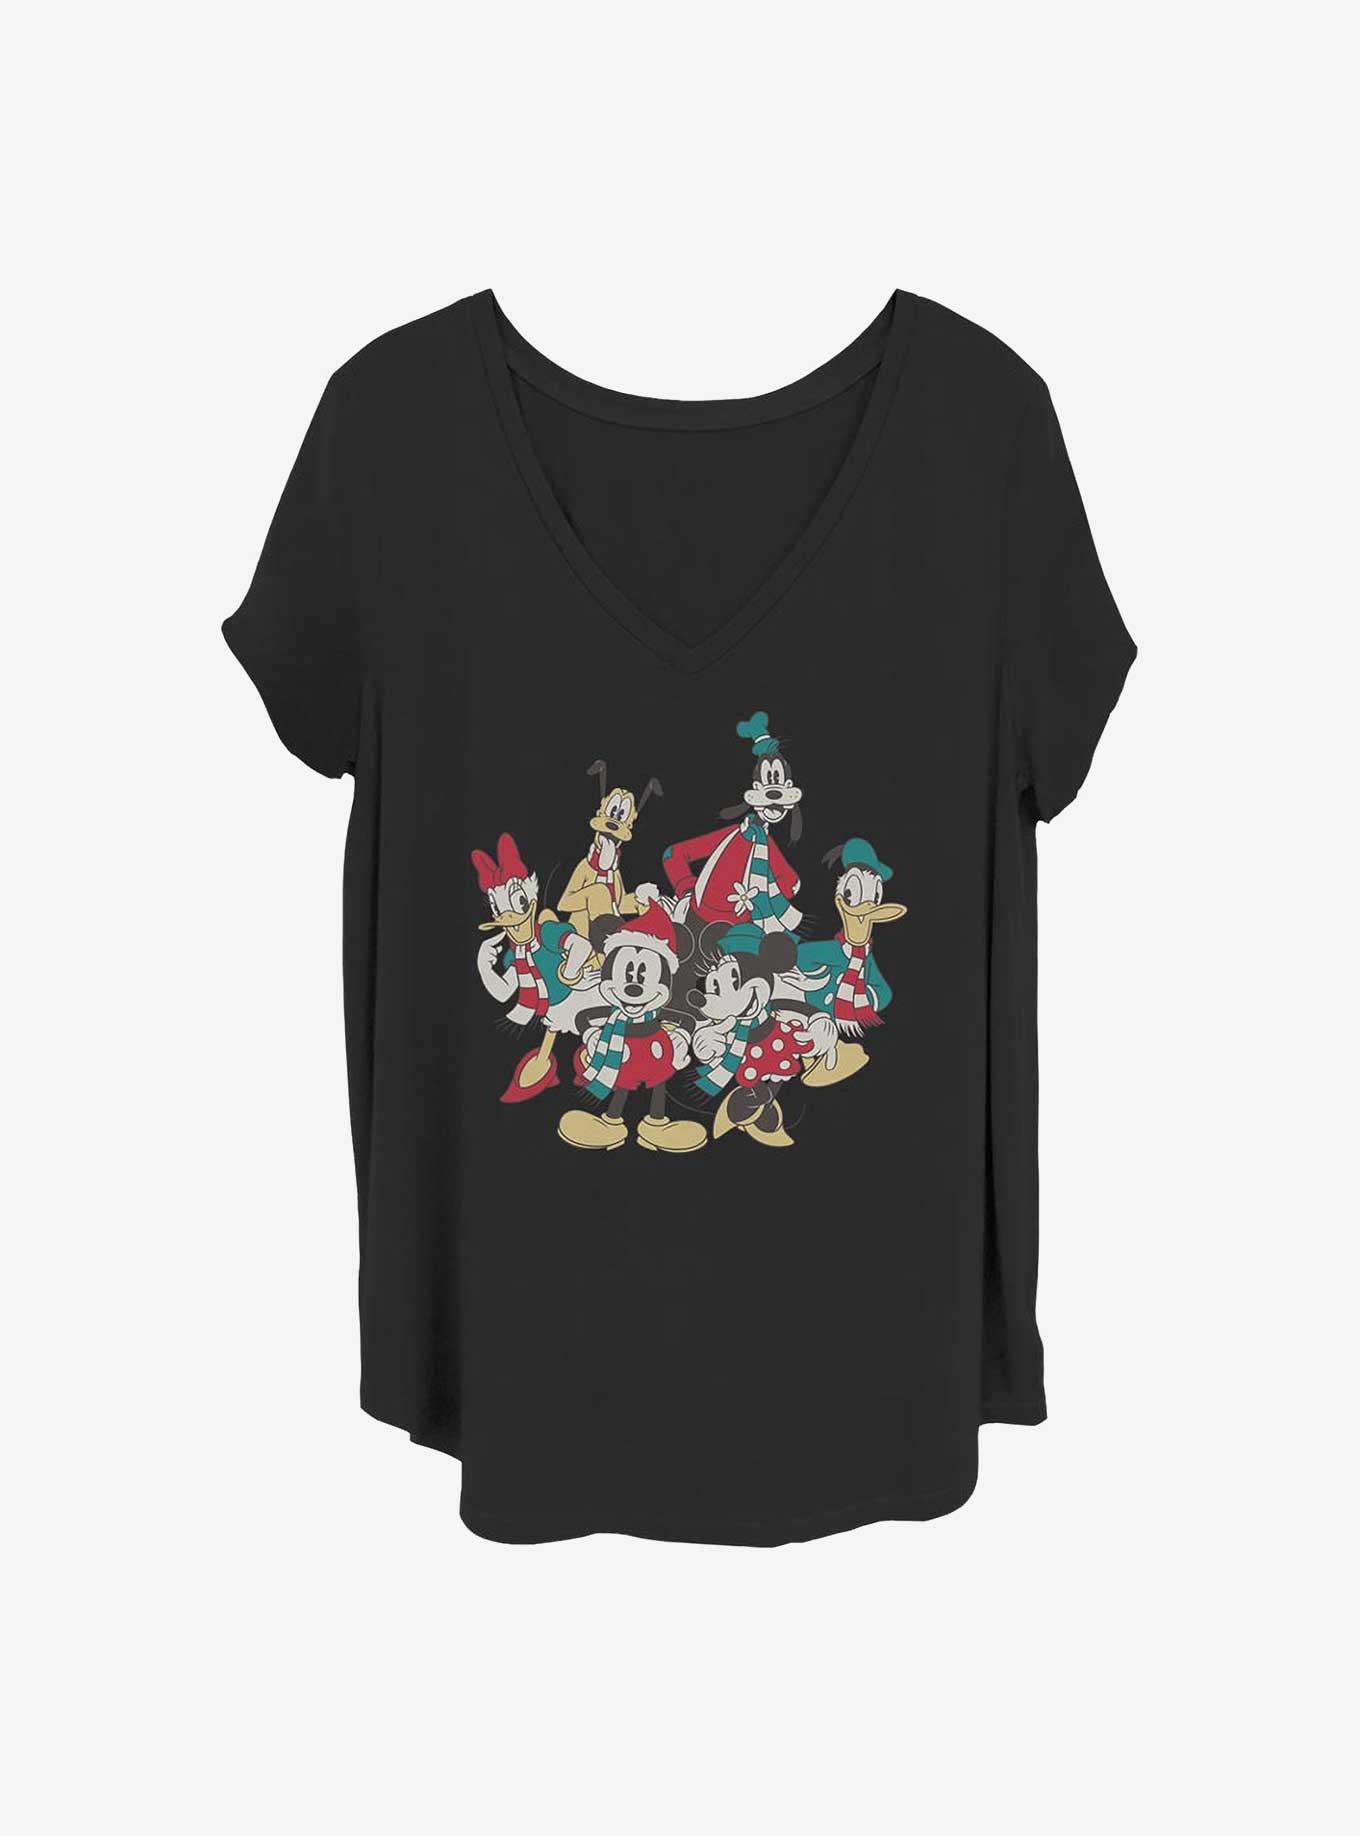 Disney Mickey Mouse Holiday Group Girls T-Shirt Plus Size, BLACK, hi-res